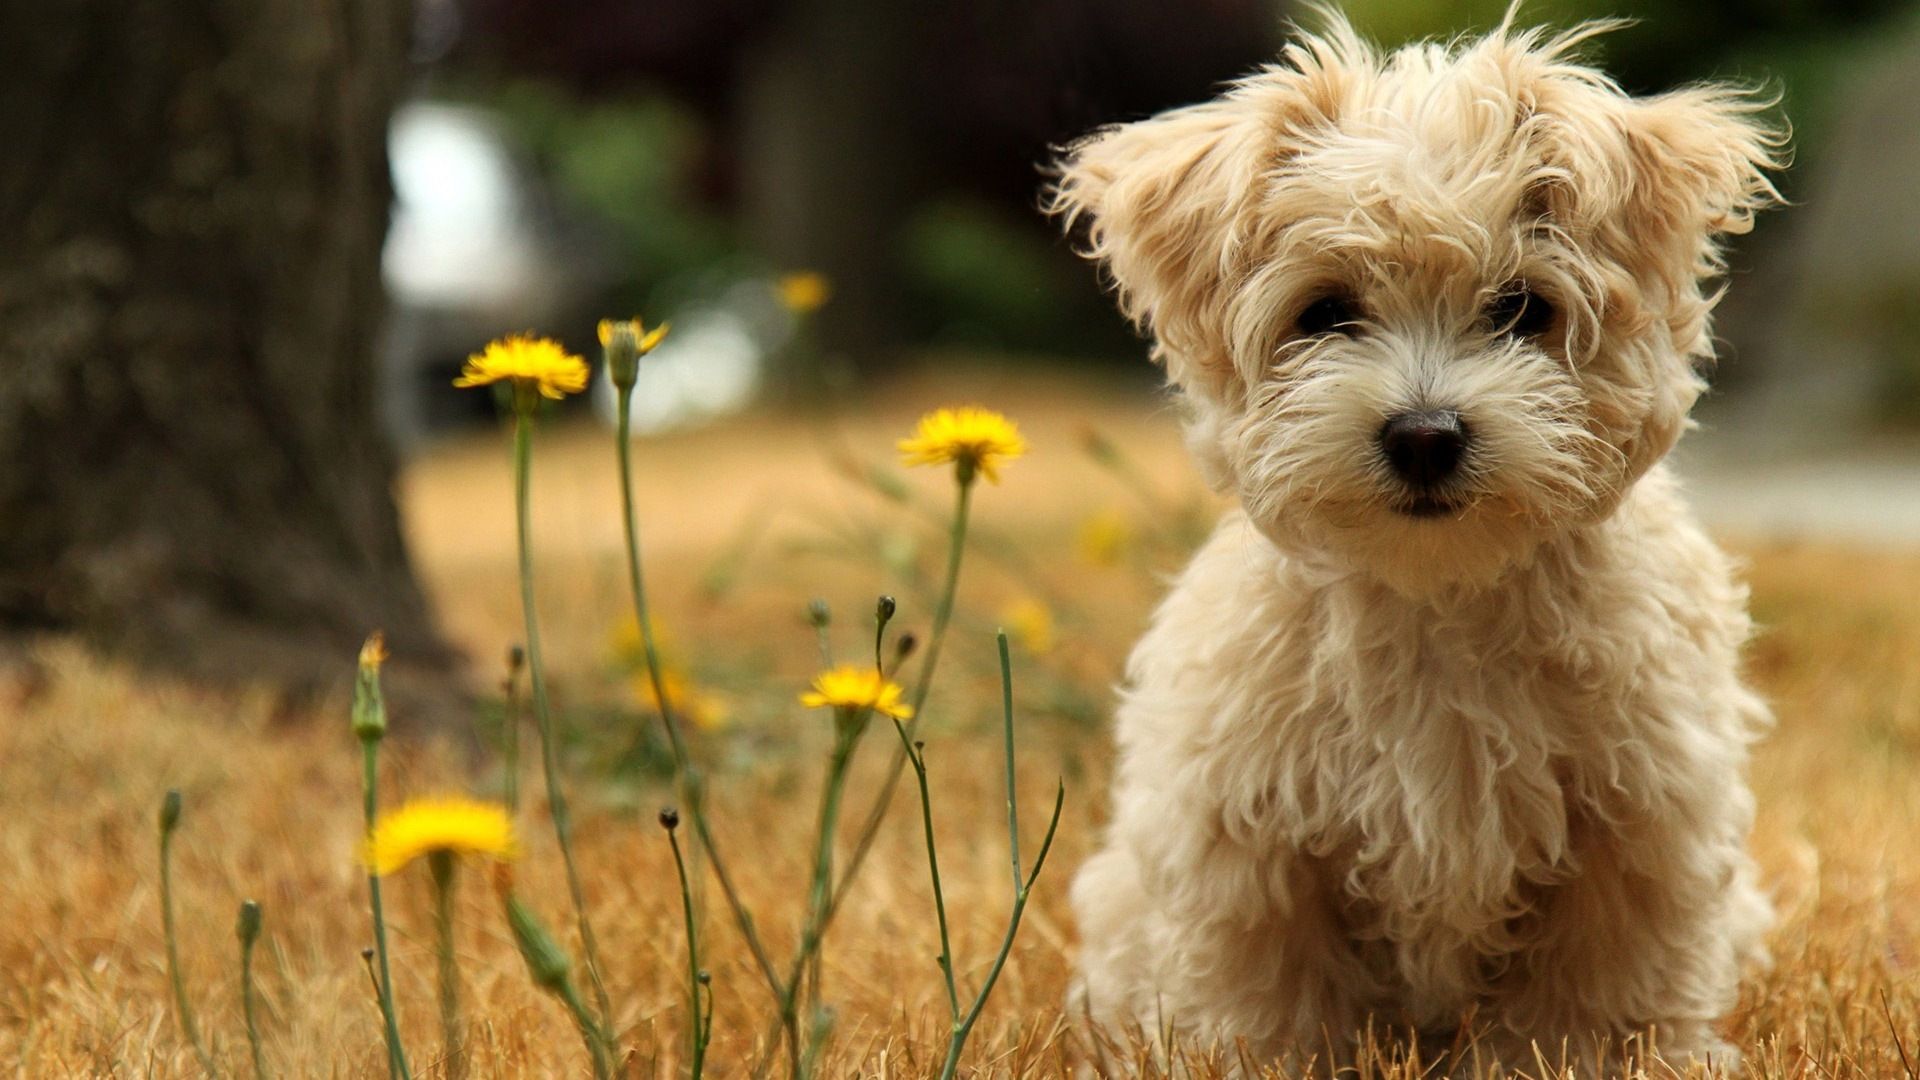 Havanese dog in flowers photo and wallpaper. Beautiful Havanese dog in flowers picture